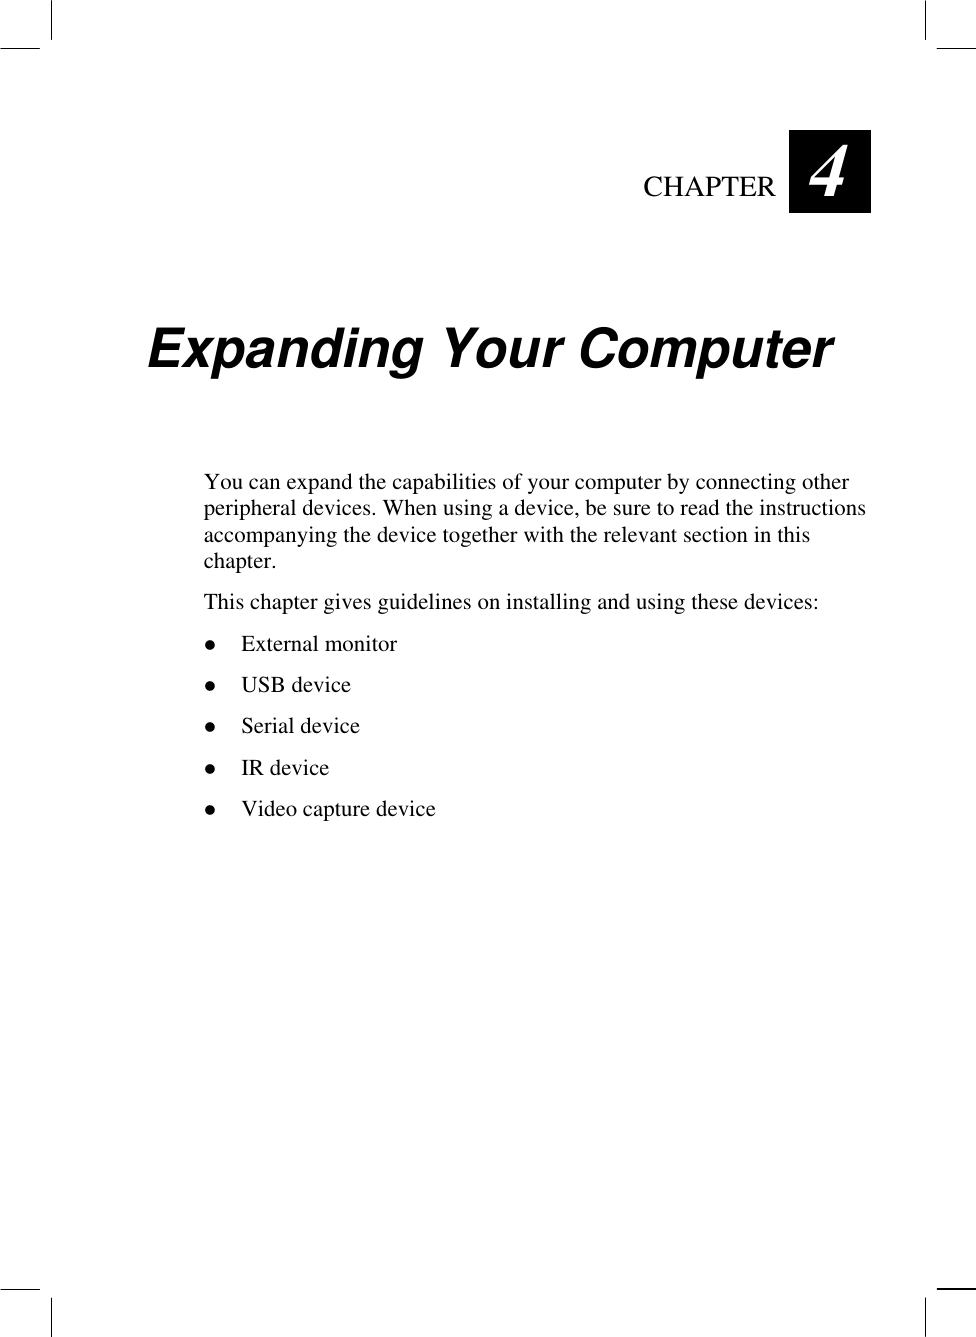   CHAPTER  4 Expanding Your Computer You can expand the capabilities of your computer by connecting other peripheral devices. When using a device, be sure to read the instructions accompanying the device together with the relevant section in this chapter. This chapter gives guidelines on installing and using these devices:   External monitor   USB device   Serial device   IR device   Video capture device  